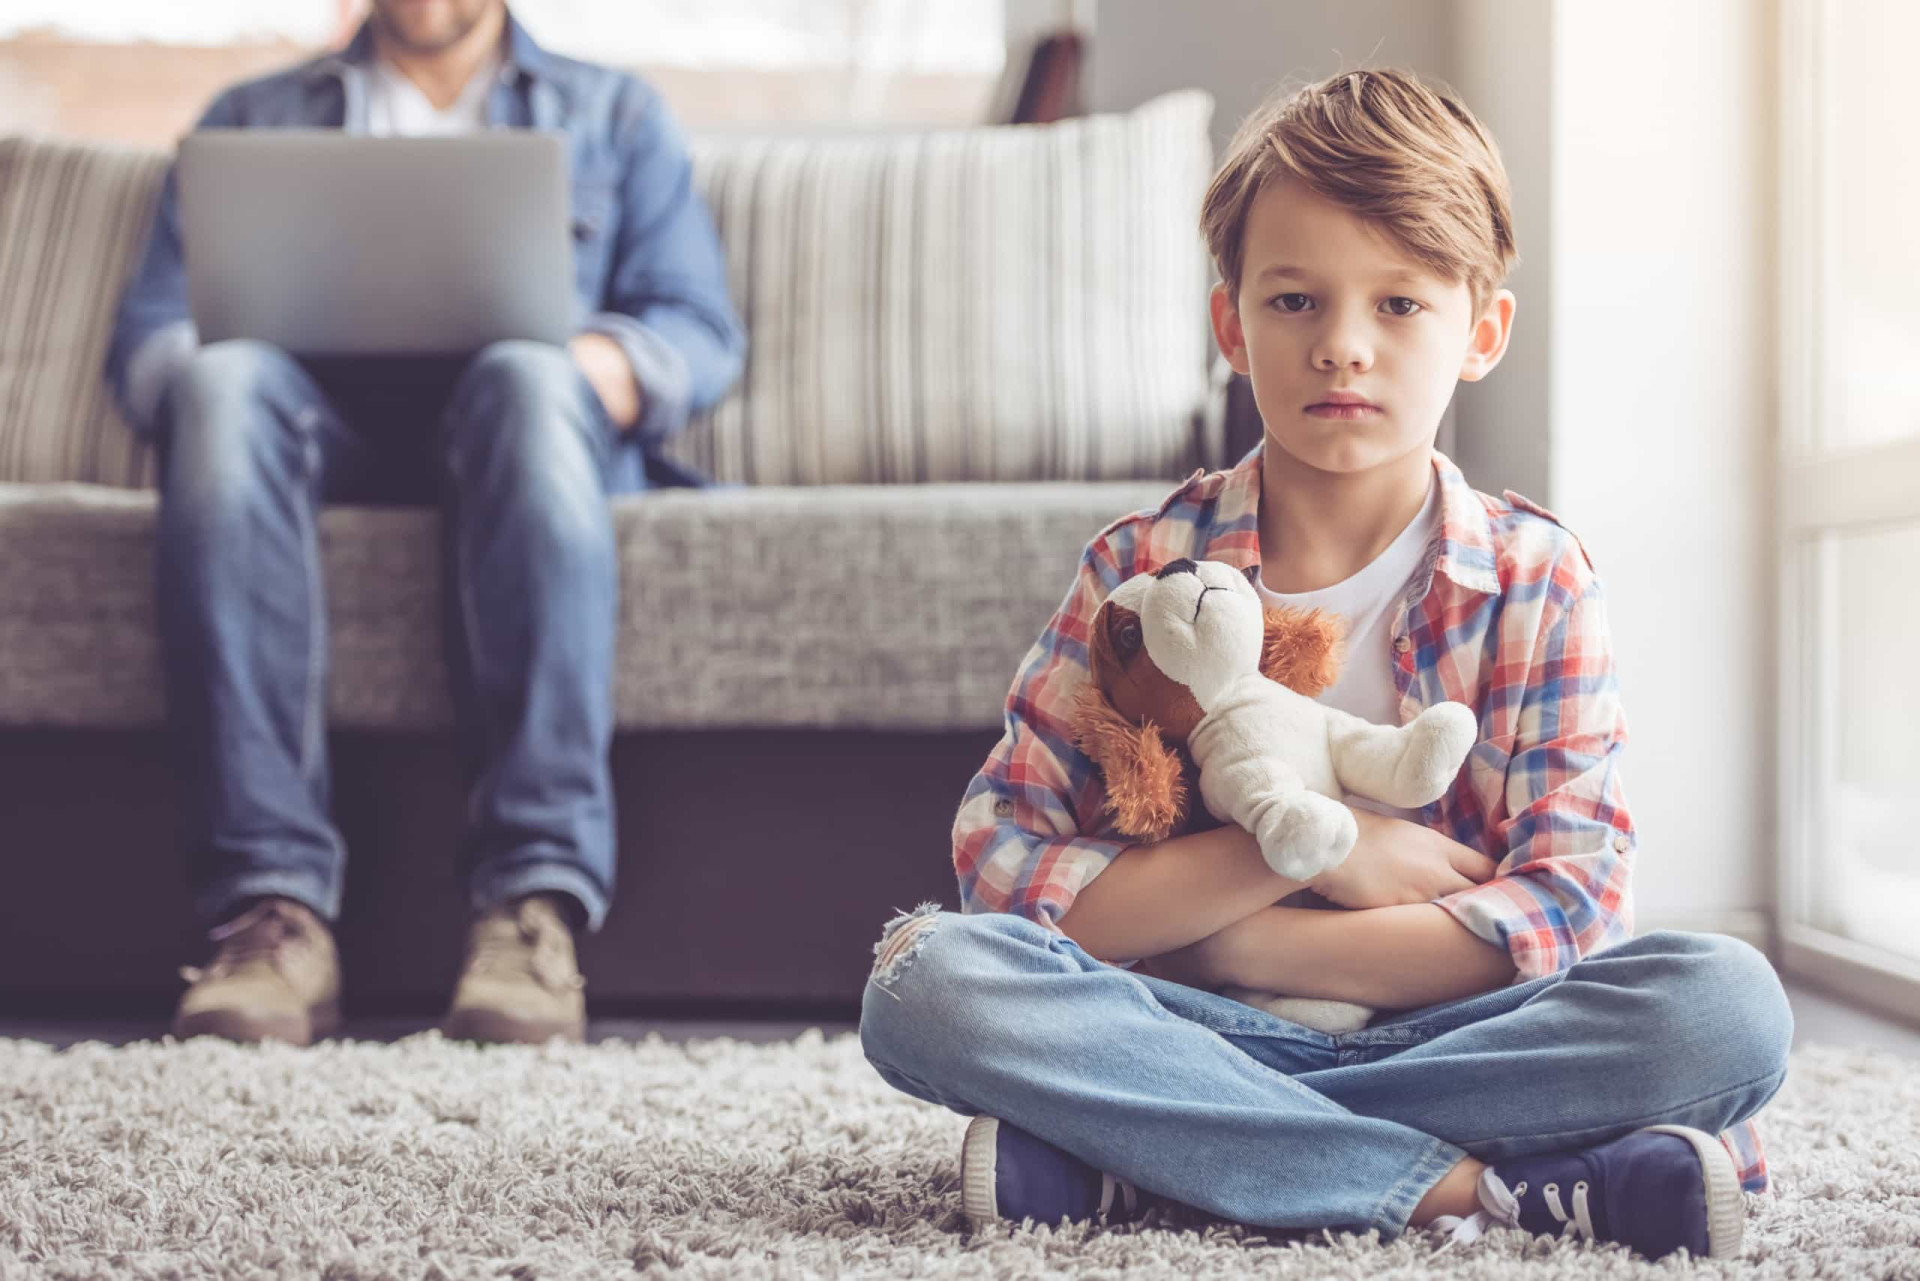 <p>These parents will tend to have very little knowledge of where their child is or what they’re doing. The child typically won’t receive much guidance, support, or warmth from this style of parent.</p><p>You may also like:<a href="https://www.starsinsider.com/n/487130?utm_source=msn.com&utm_medium=display&utm_campaign=referral_description&utm_content=467601v2en-en"> Recognizing ‘Cluster C’ personality disorders</a></p>